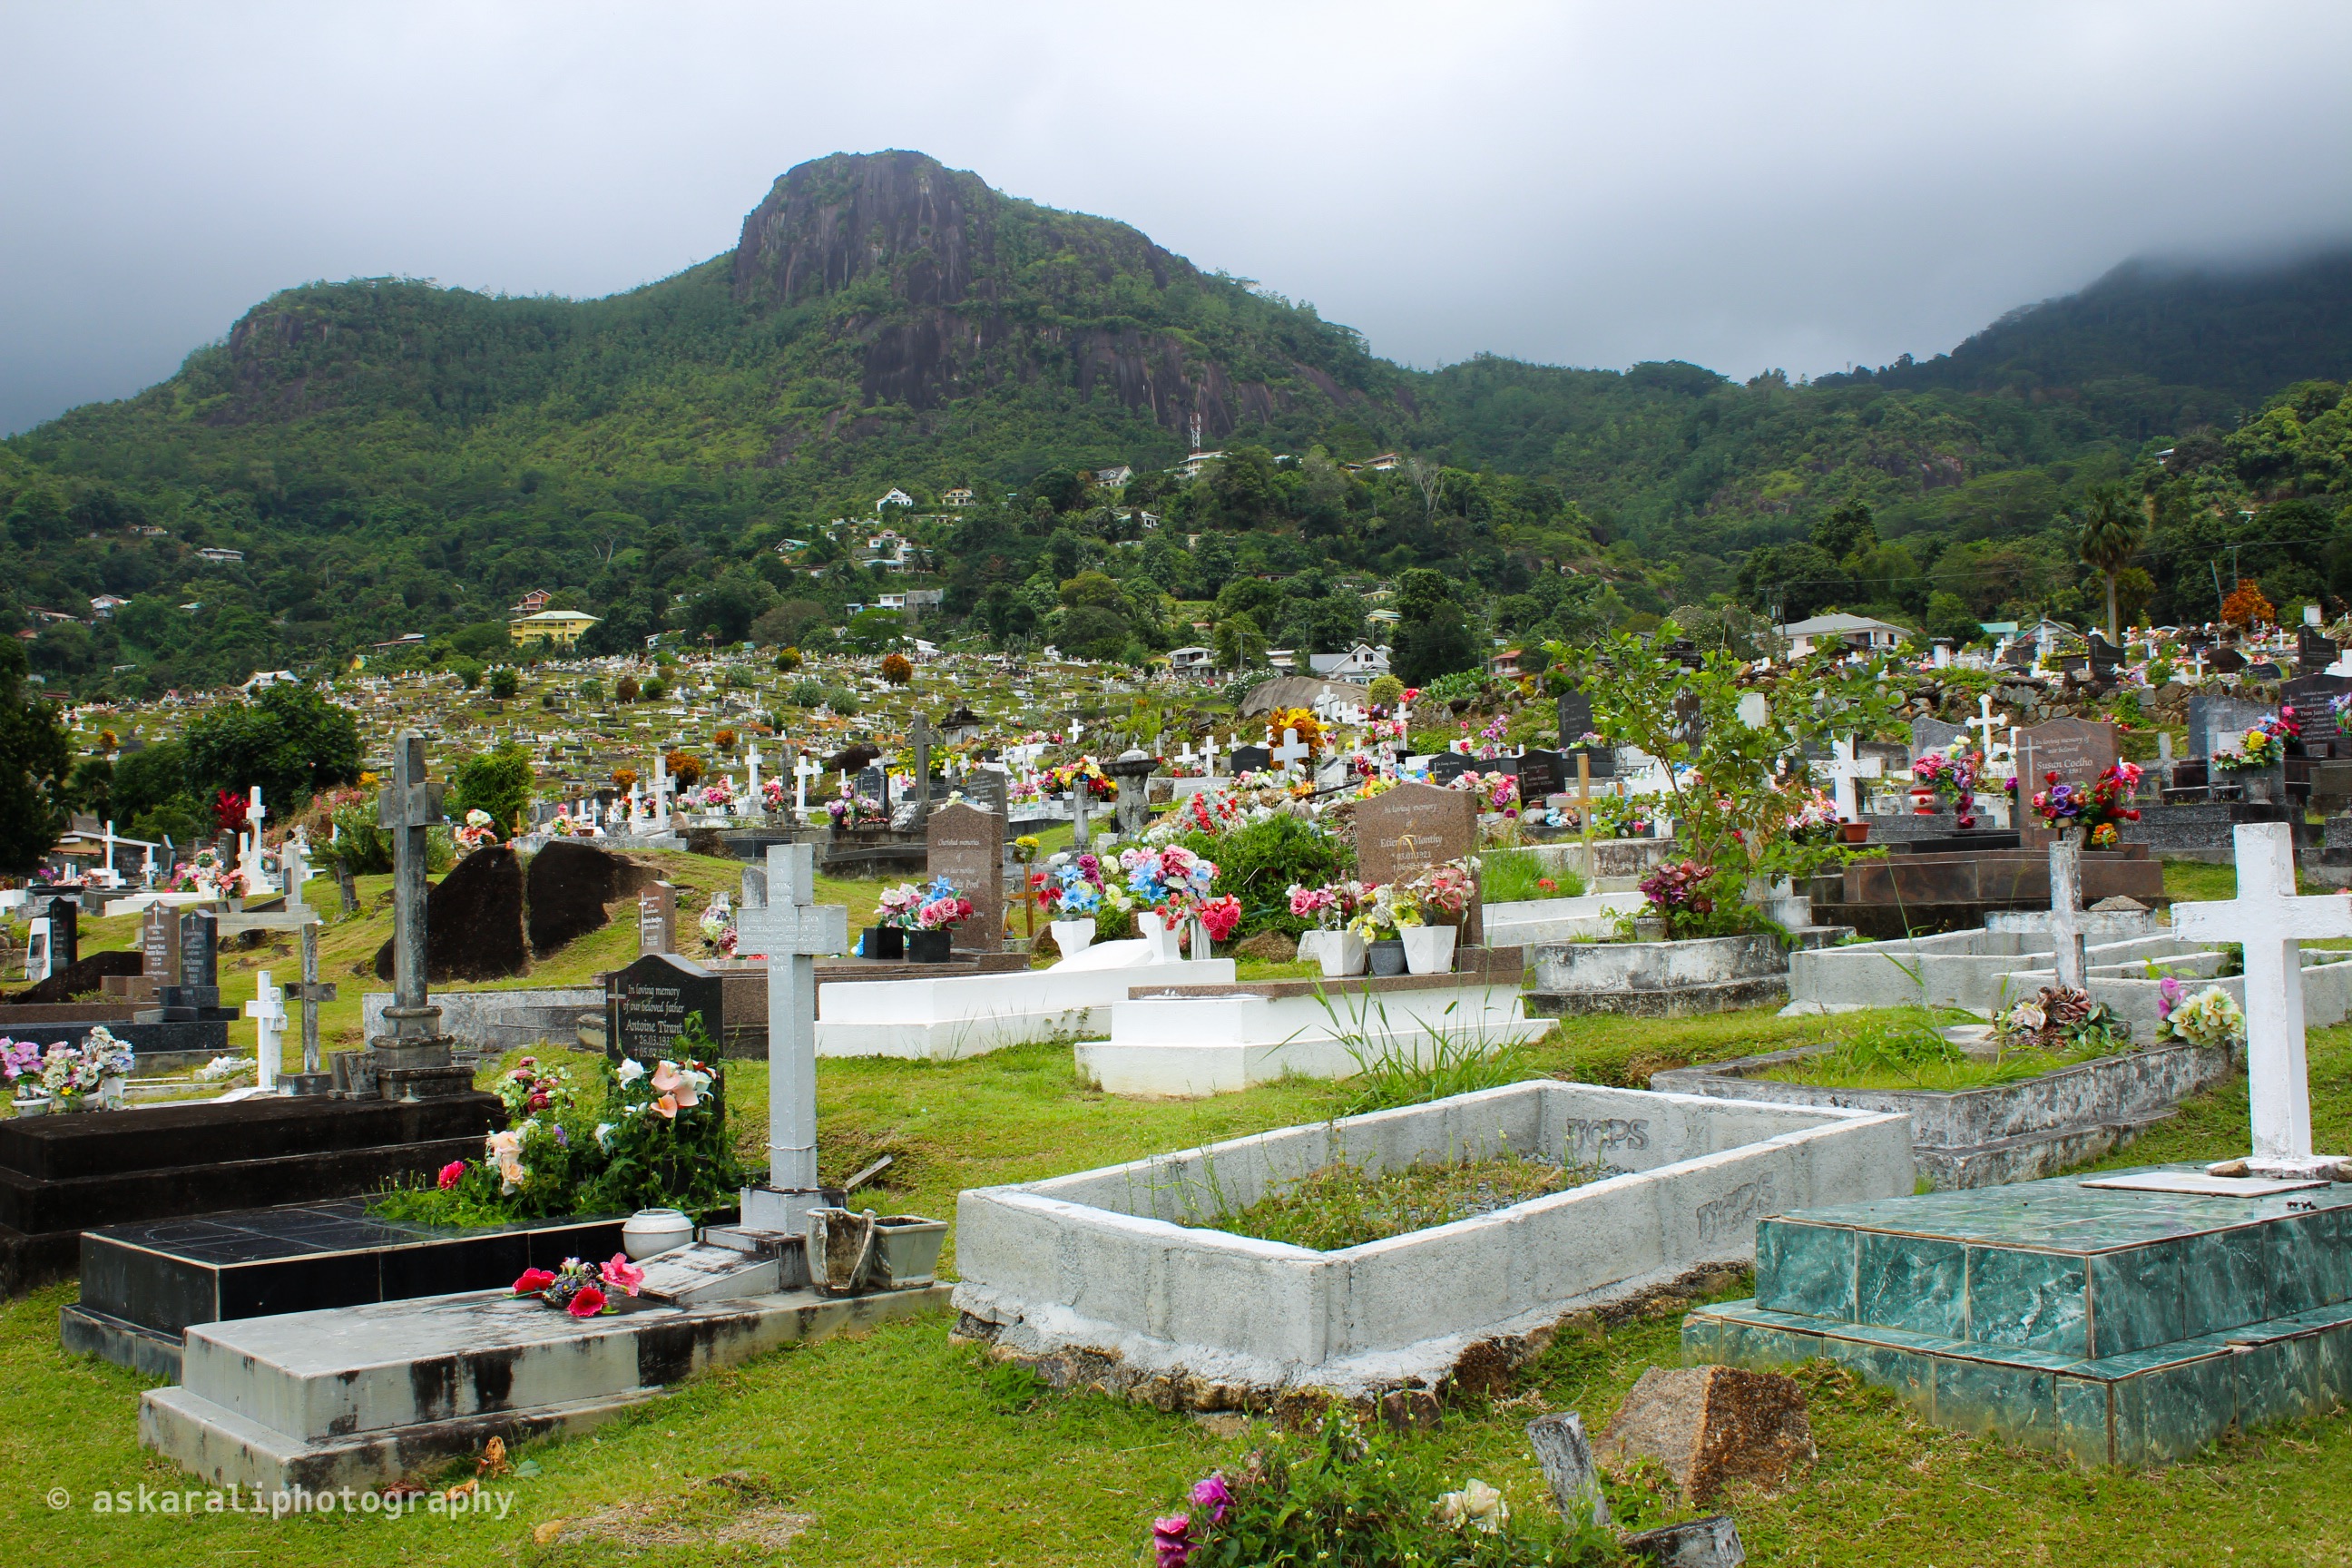 Going through the beautiful Cemetery can easily show the history, it has many Captains and great sailors who loved the island and made it their home.
As french and british colonized, Seychelles still has many french and british influence in population, so the graveyard says the story.